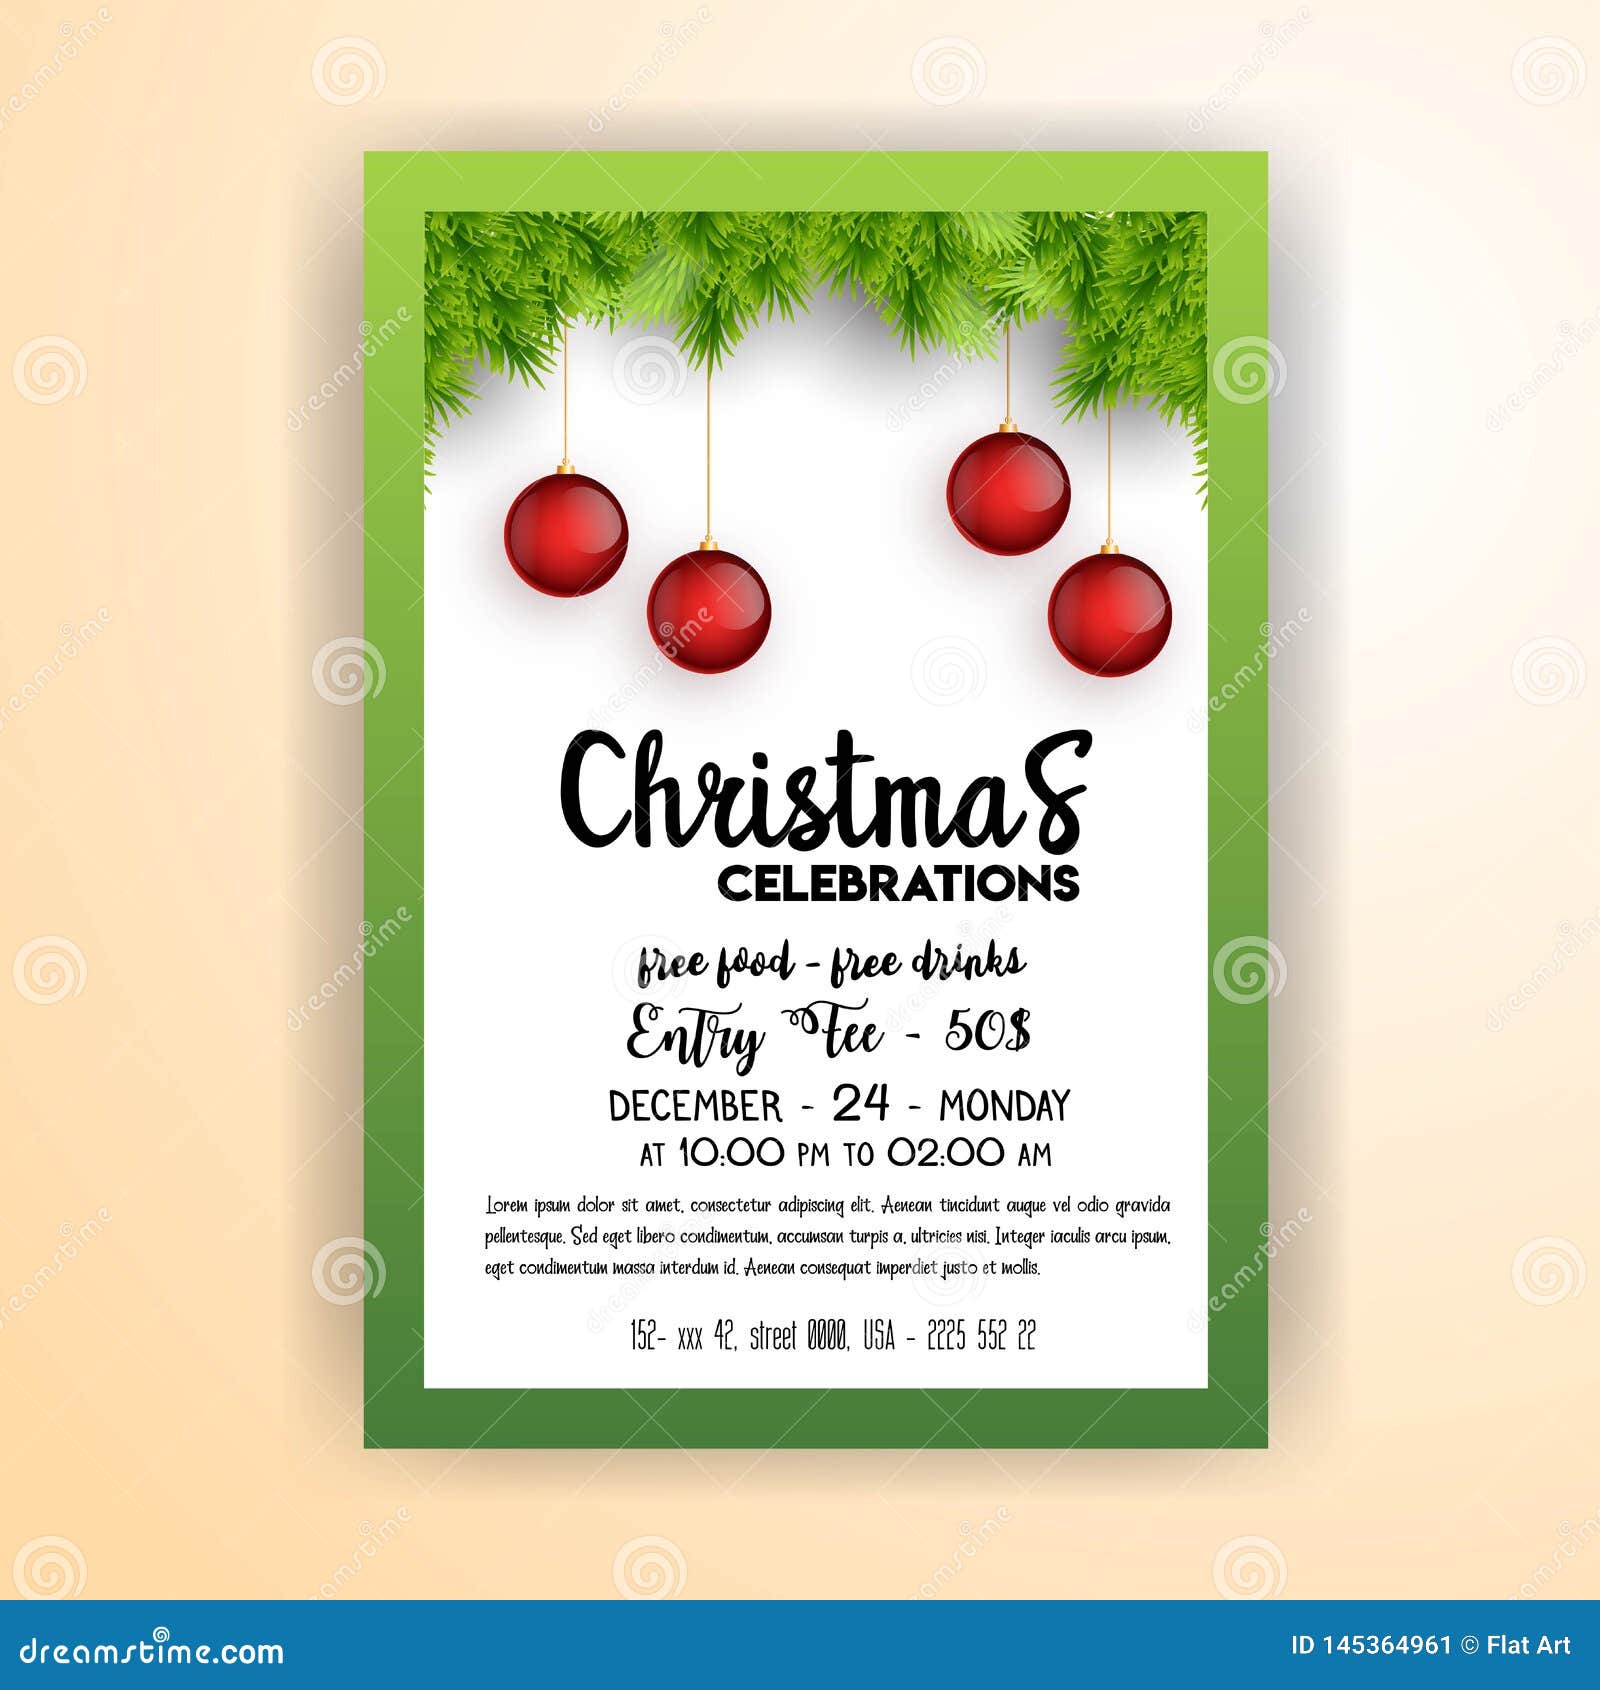 Vintage Christmas Party Flyer Template Stock Vector - Illustration Inside Free Christmas Party Flyer Templates